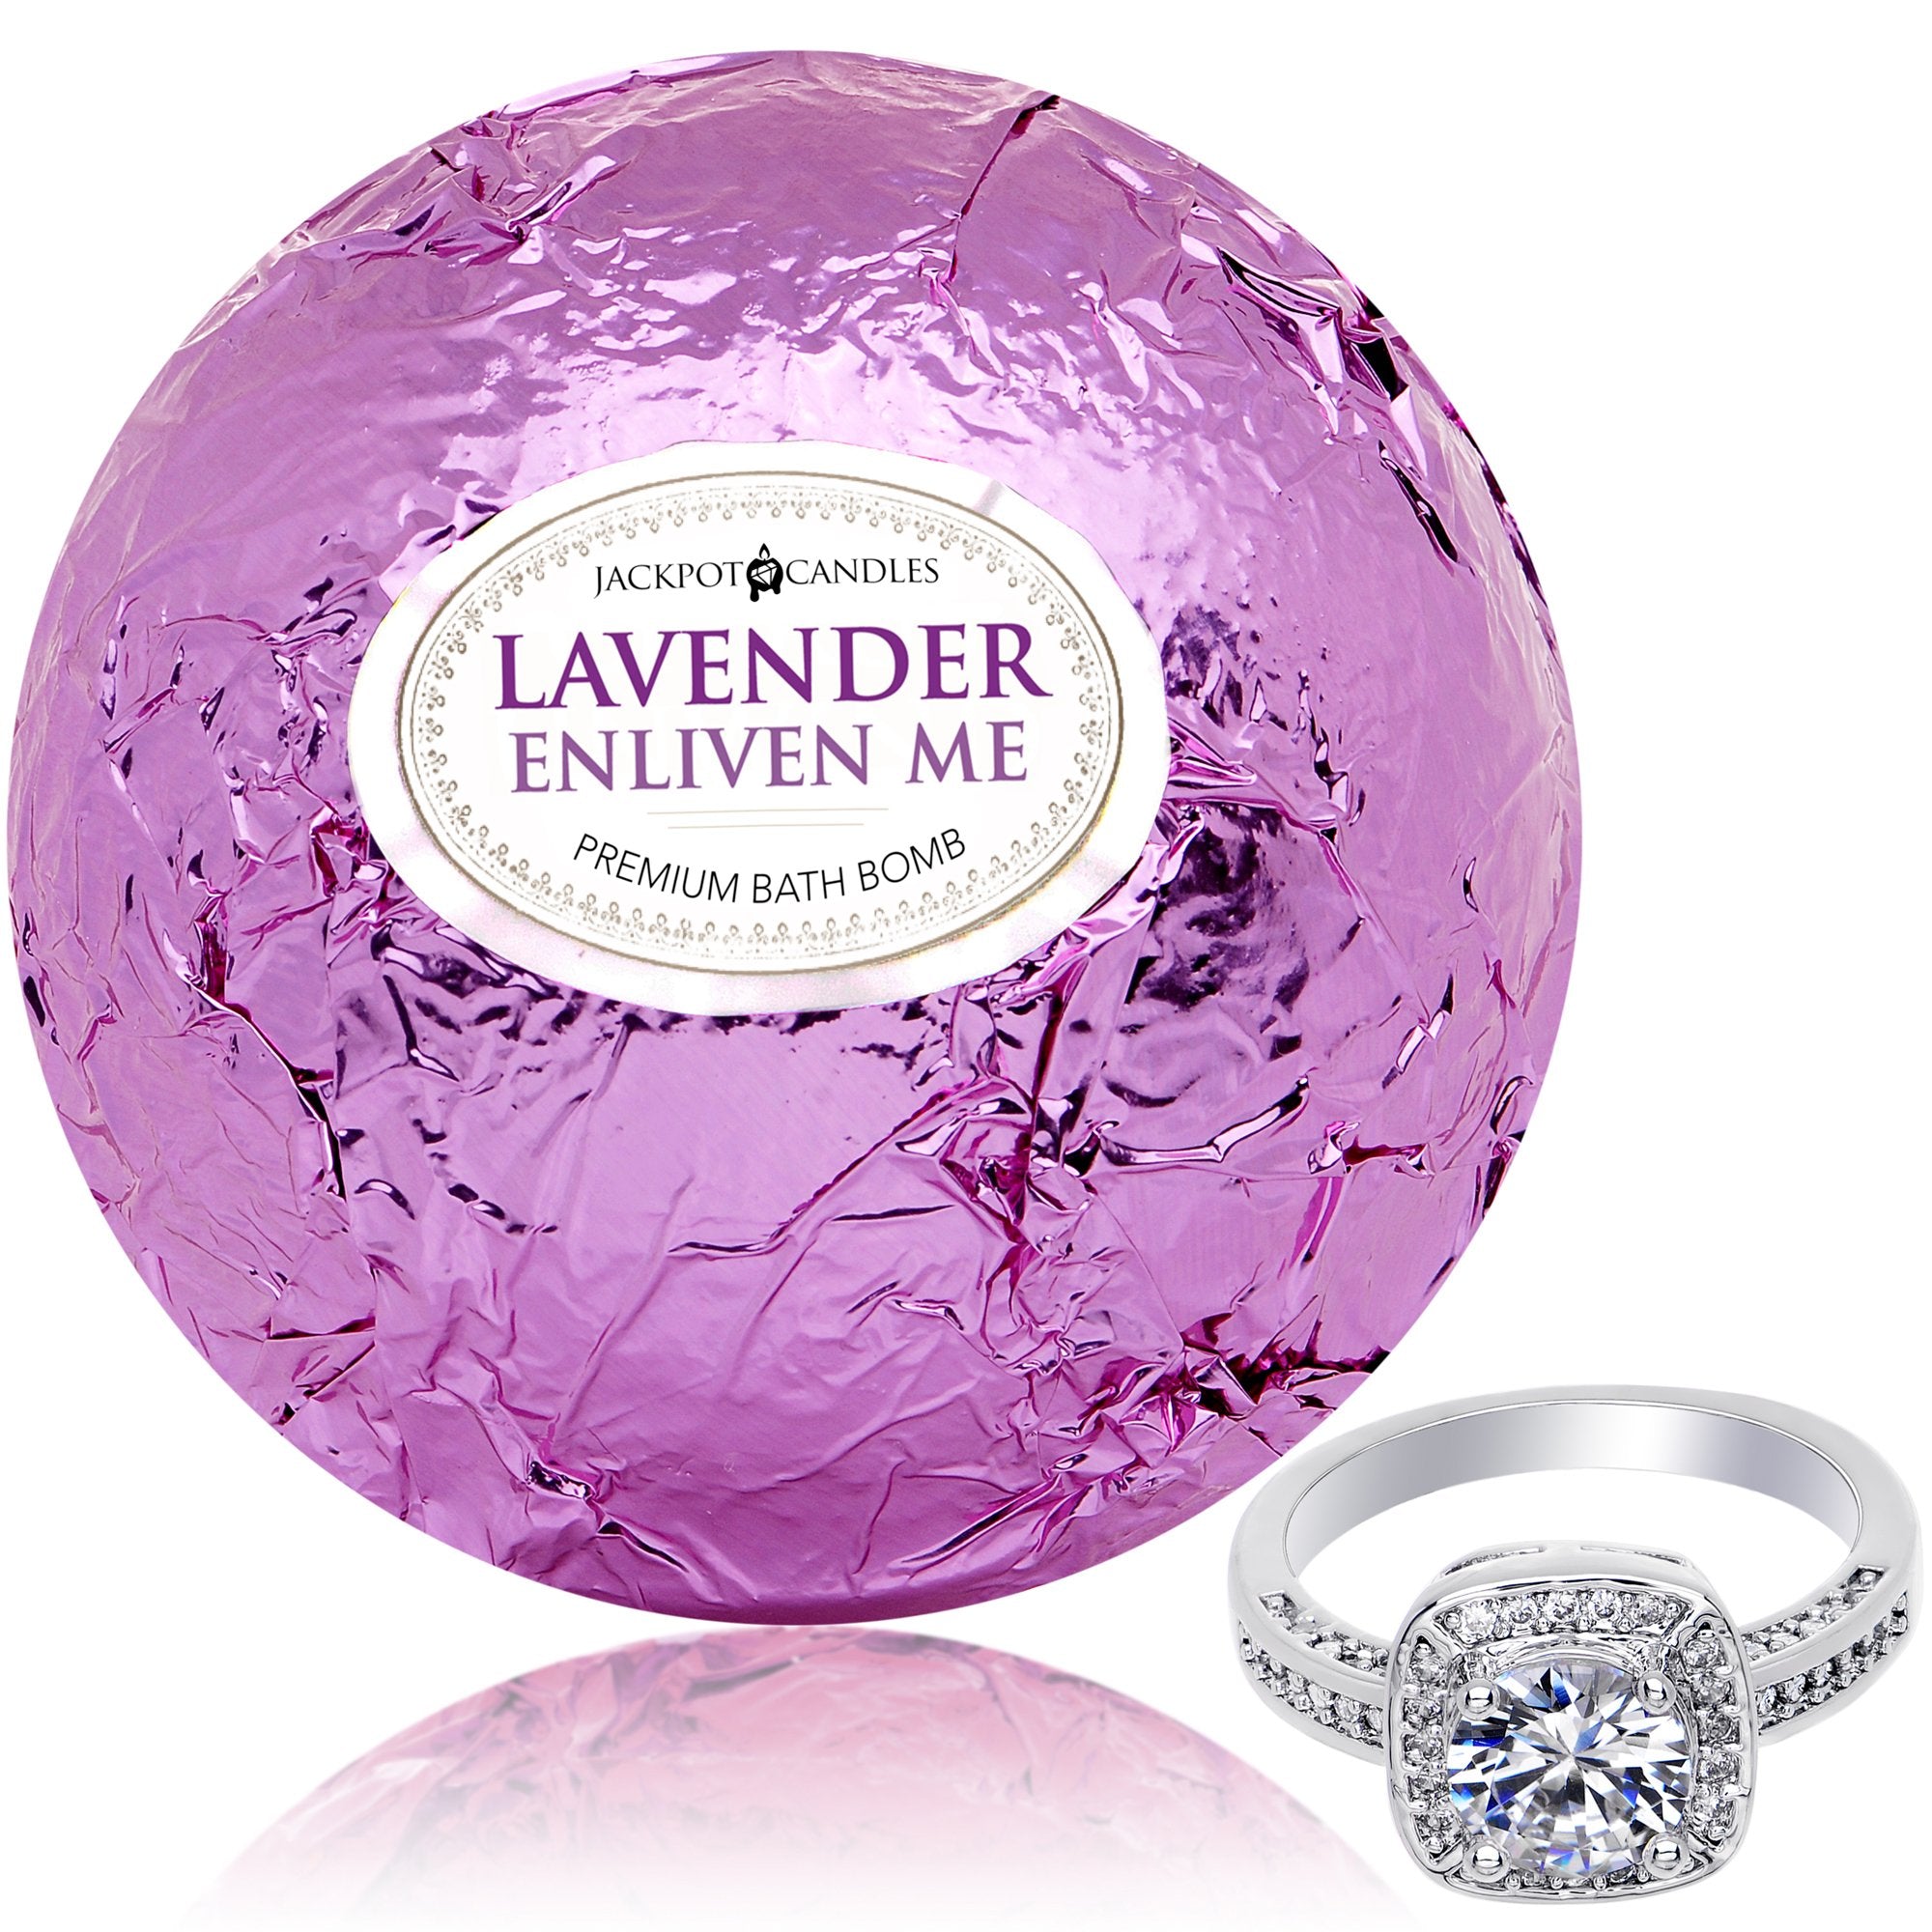 Enliven Me Lavender Bath Bomb with Jewelry Ring Inside